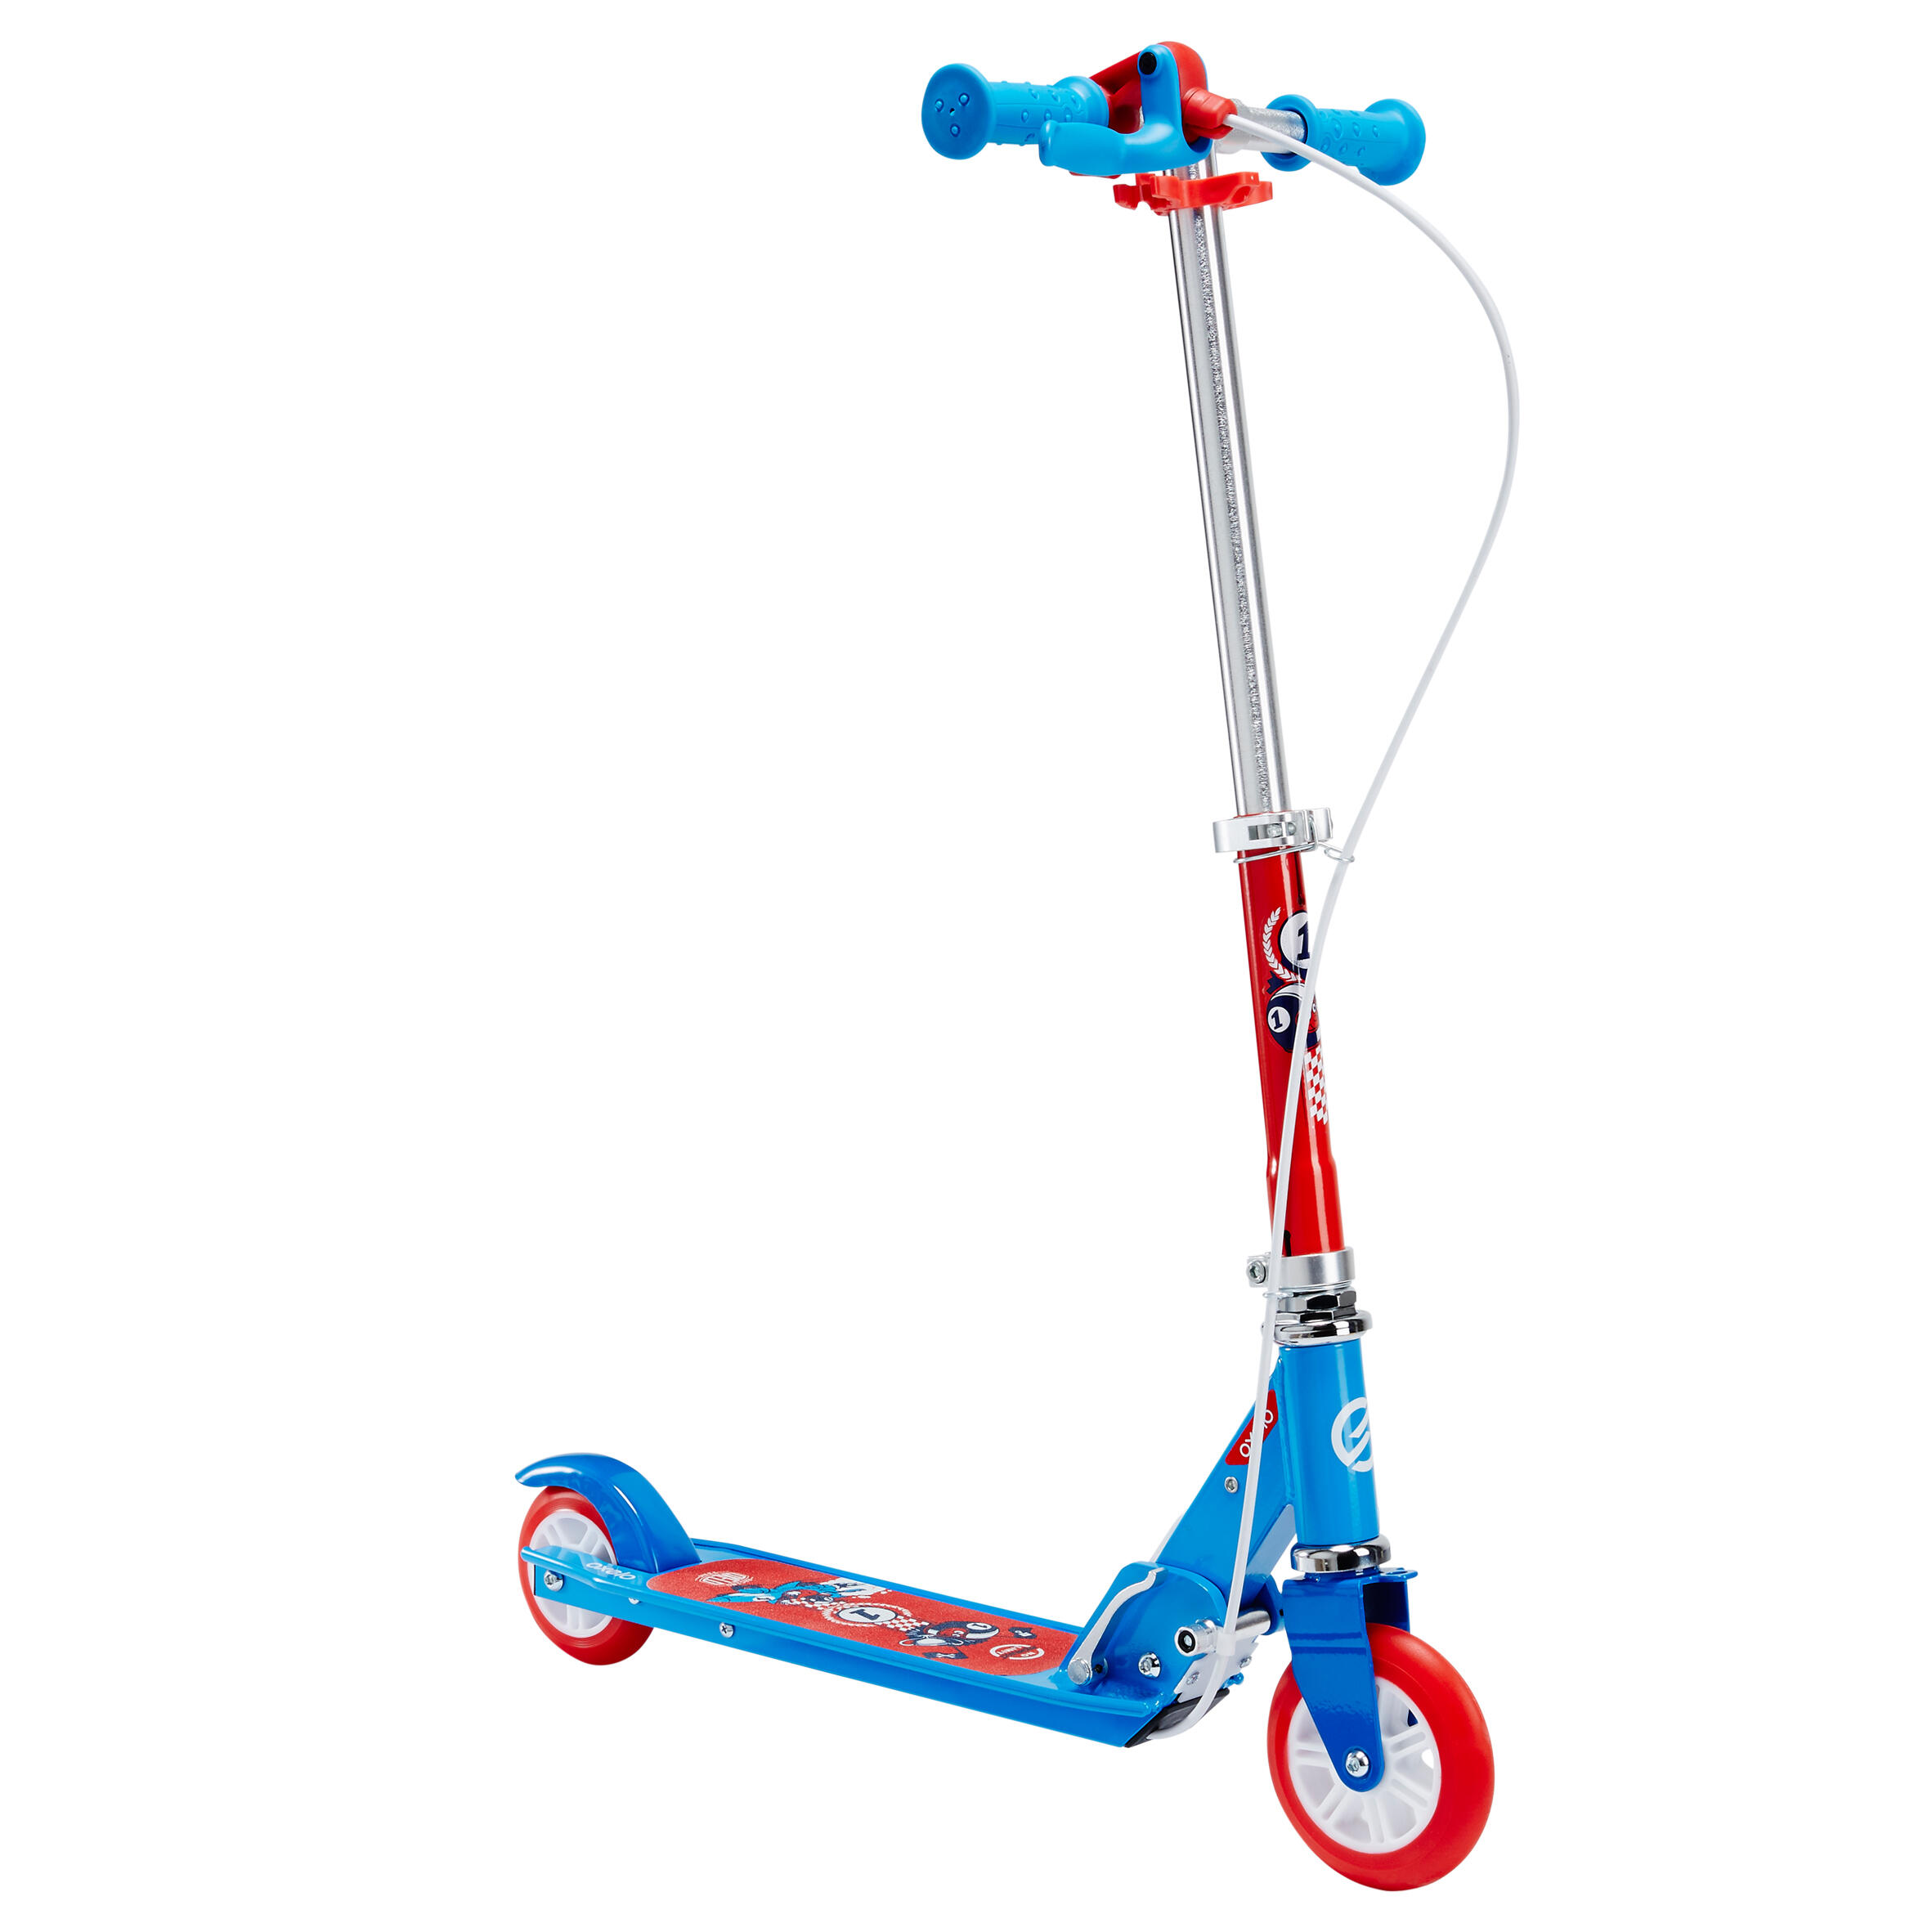 Kids' Scooter with Brake OXELO - Decathlon